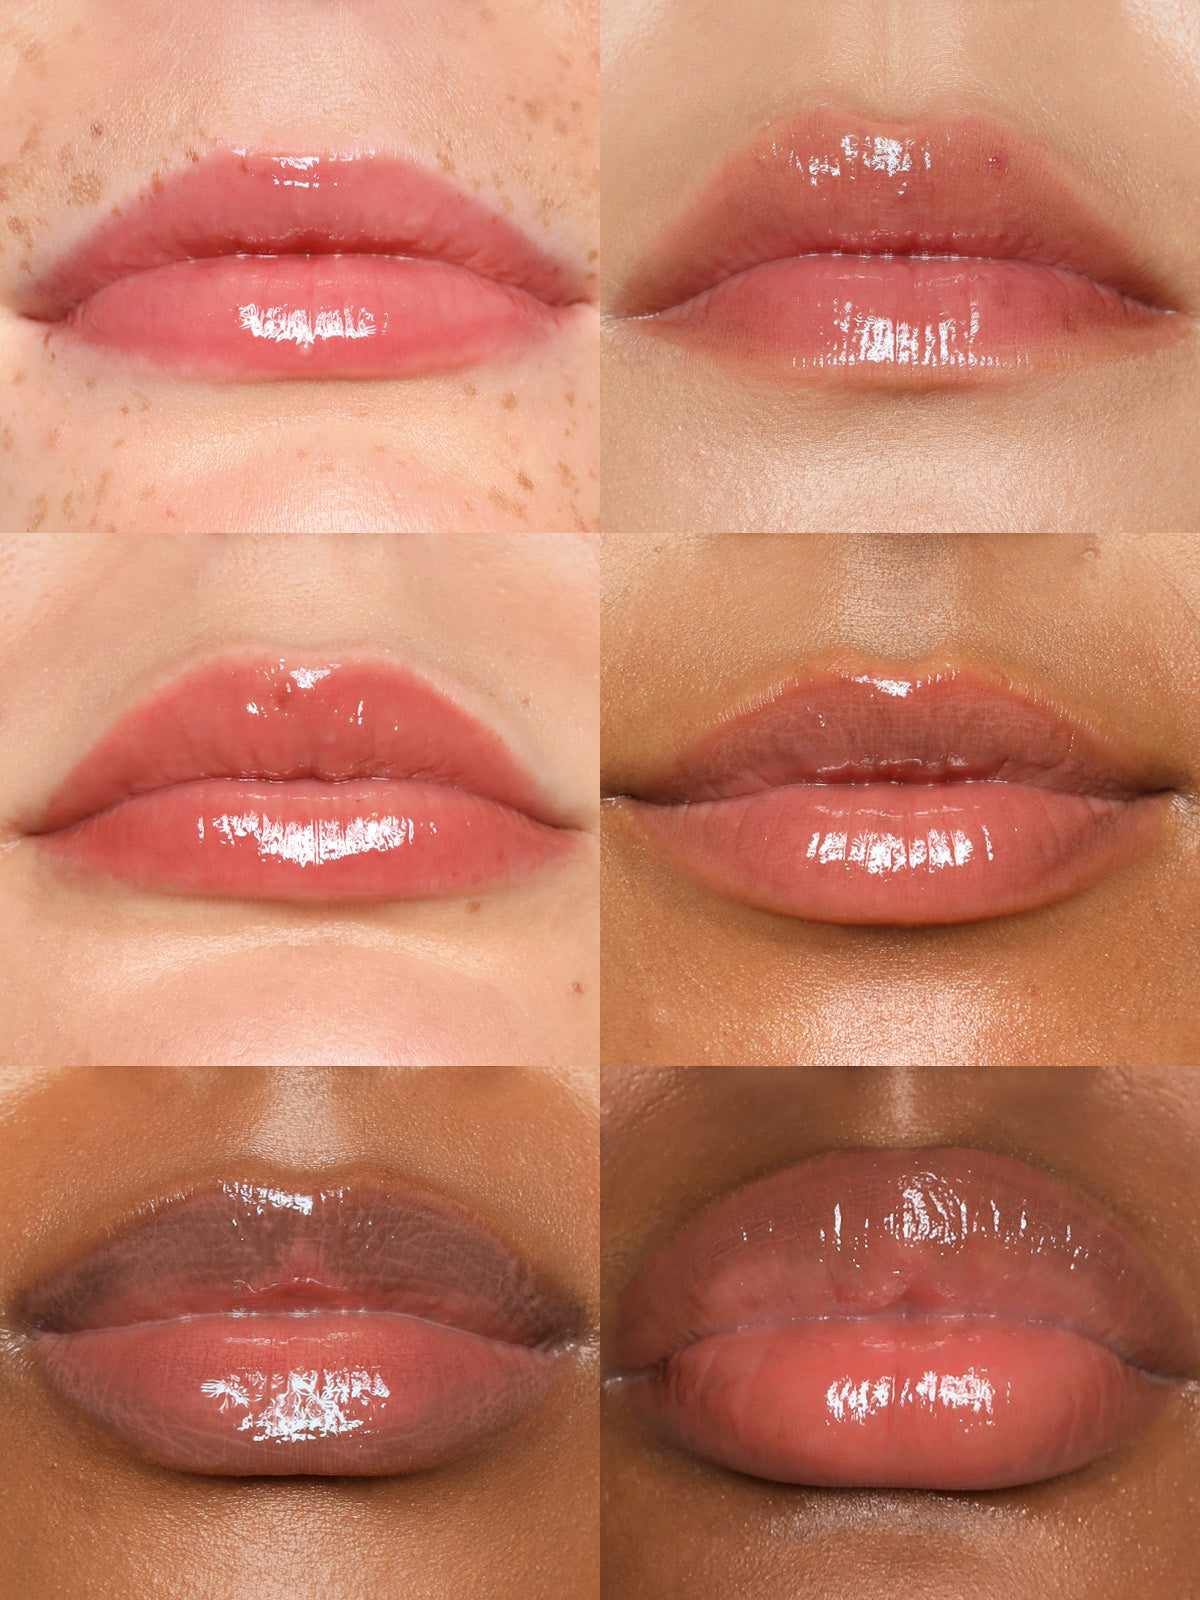 GRID OF REFY LIP GLOSS IN SHADE ROSEWOOD ON DIFFERENT SKIN TONES